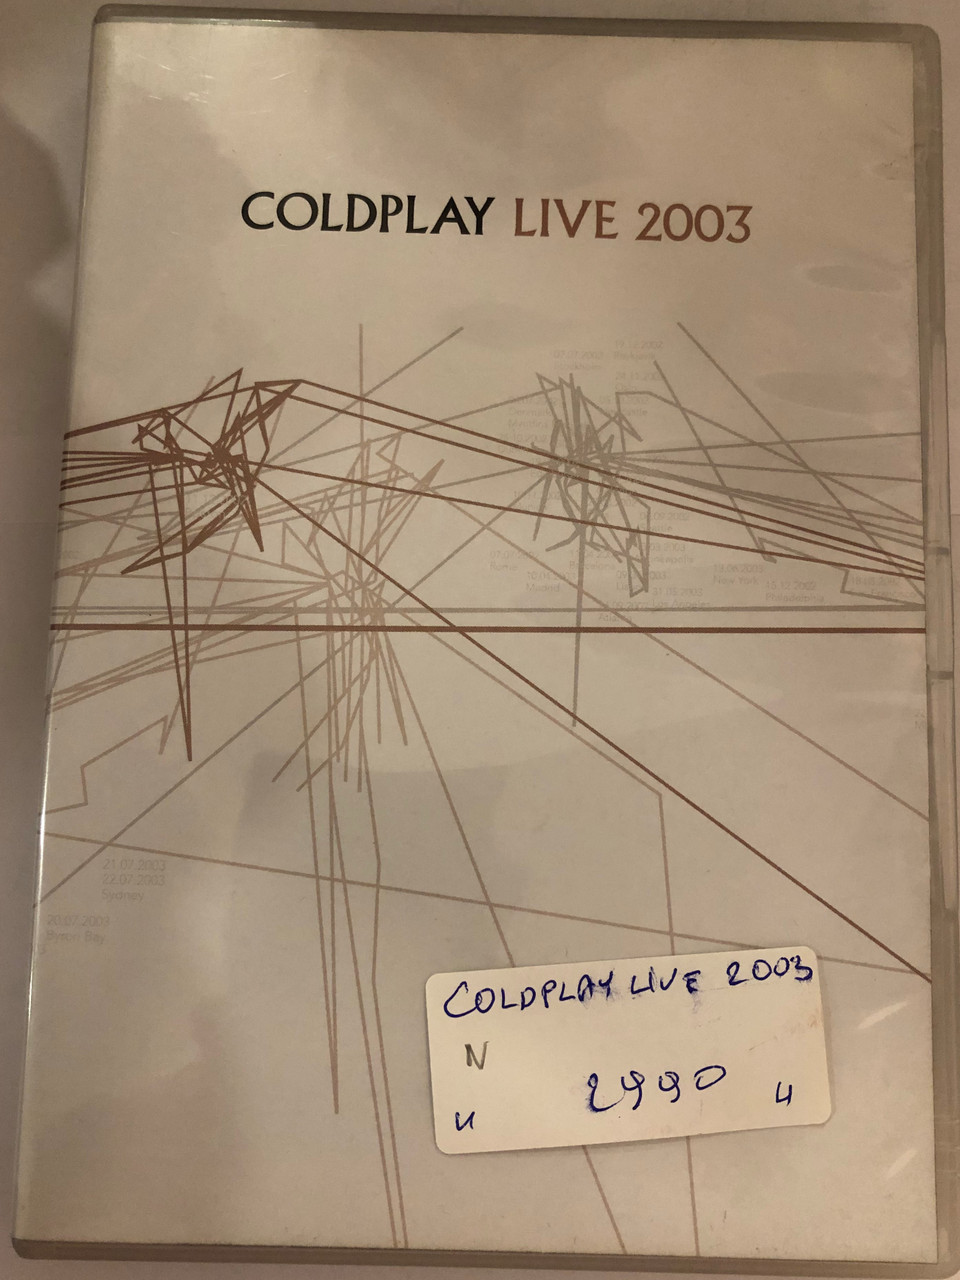 Coldplay Live DVD 2003 / Live Concert, Multi-angle feature, Tour diary  documentary / Emi Records - bibleinmylanguage